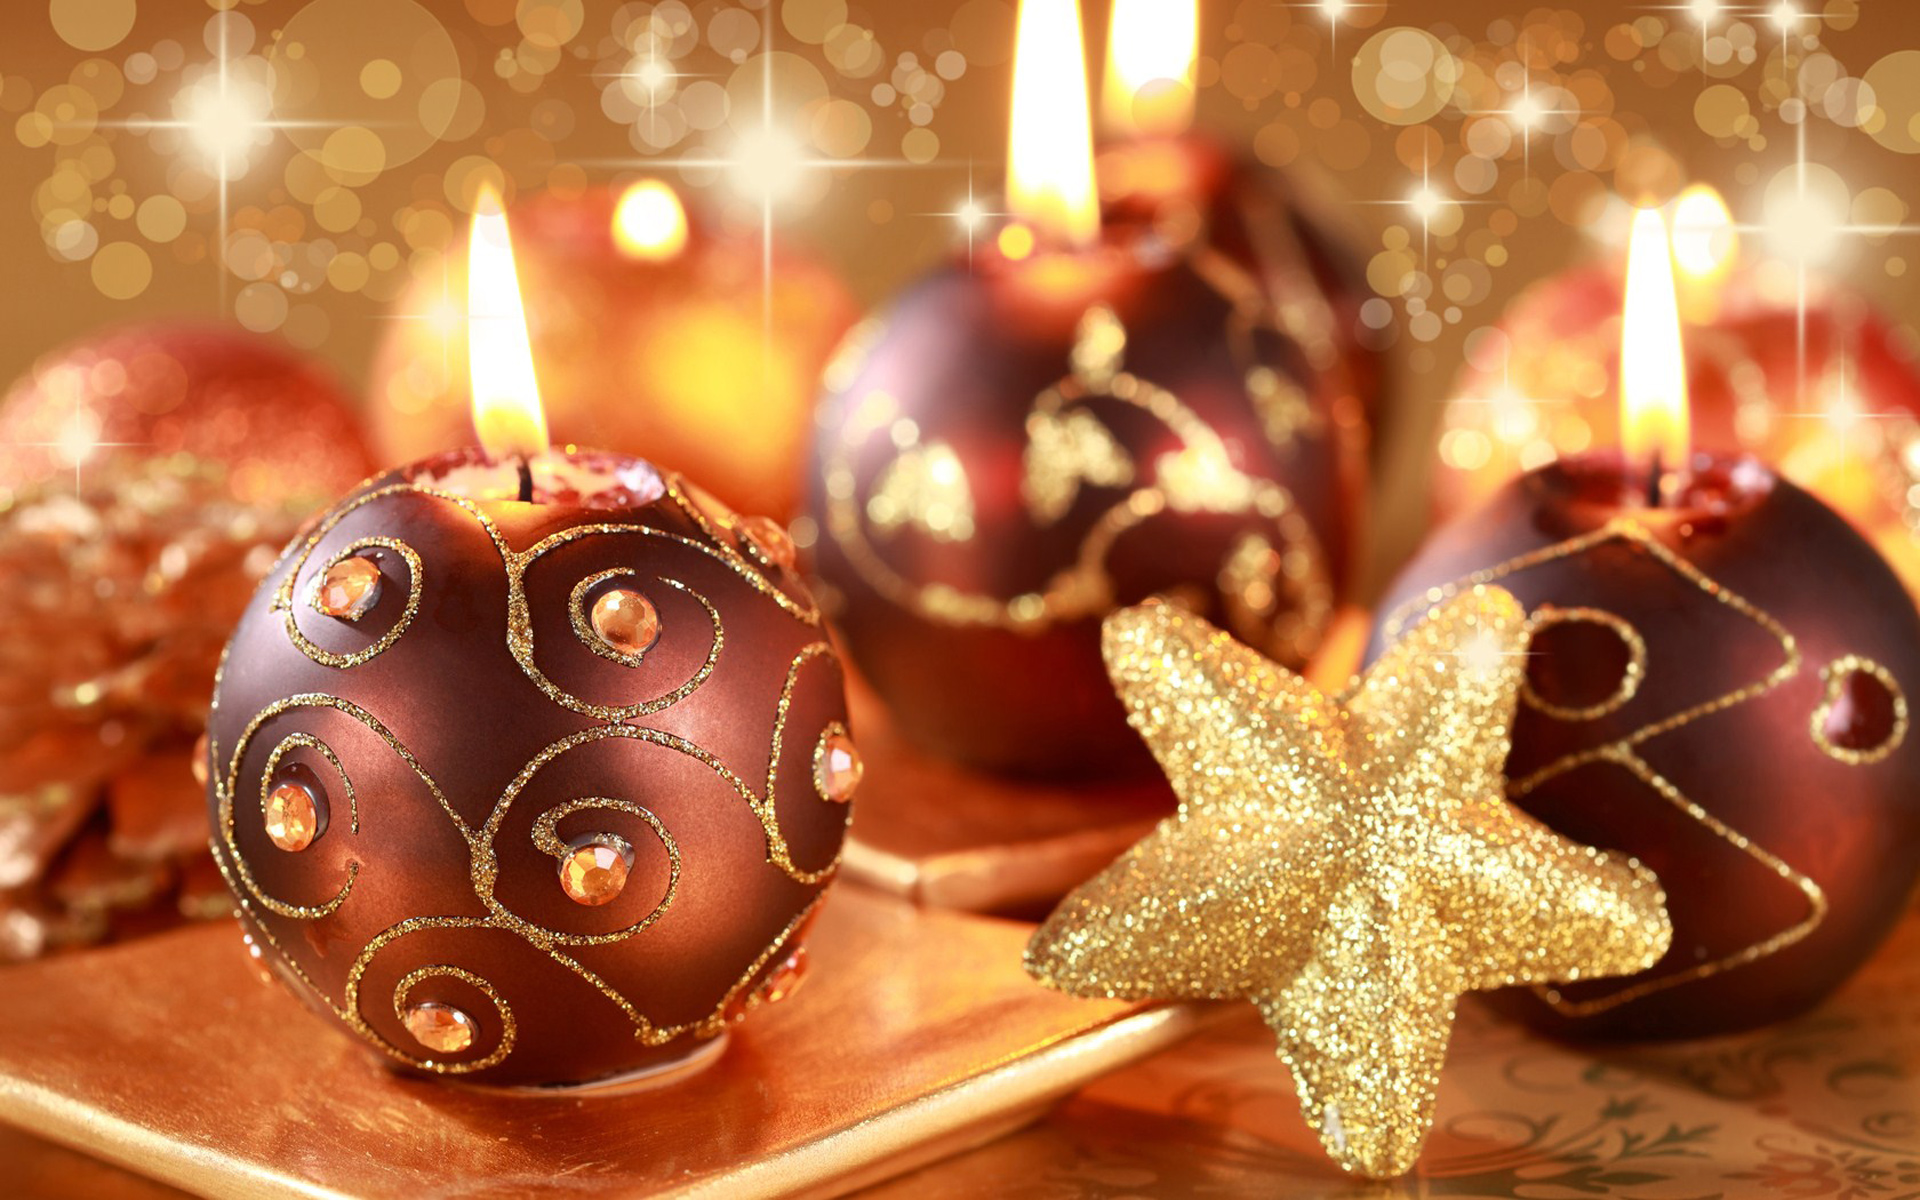 Lovely Christmas Candles Wallpaper